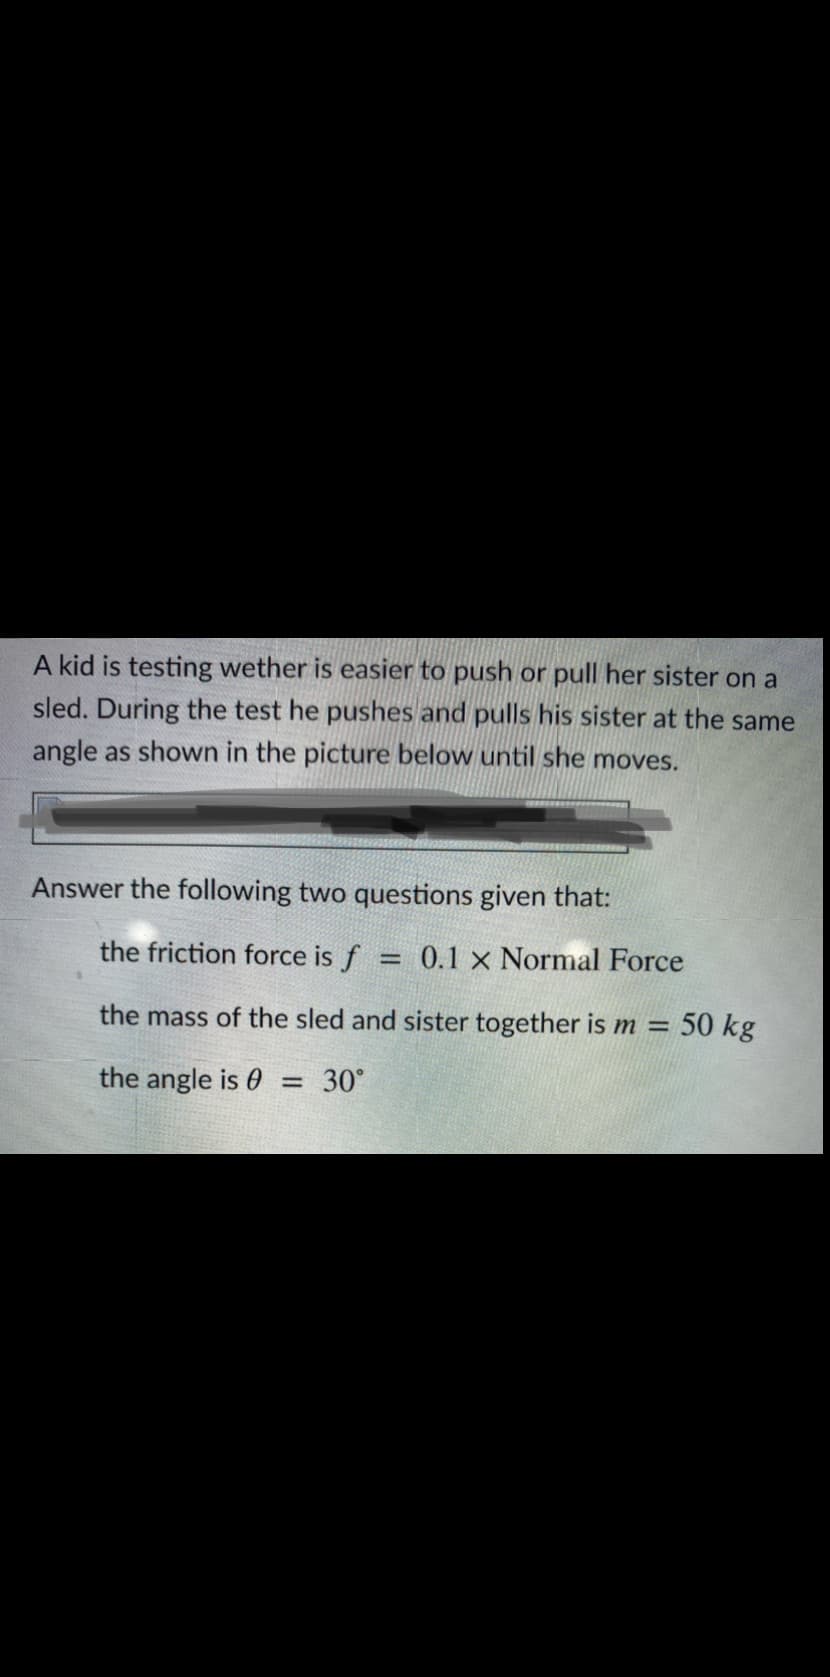 A kid is testing wether is easier to push or pull her sister on a
sled. During the test he pushes and pulls his sister at the same
angle as shown in the picture below until she moves.
Answer the following two questions given that:
the friction force is f
0.1 x Normal Force
the mass of the sled and sister together is m =
50 kg
the angle is 0
30°
